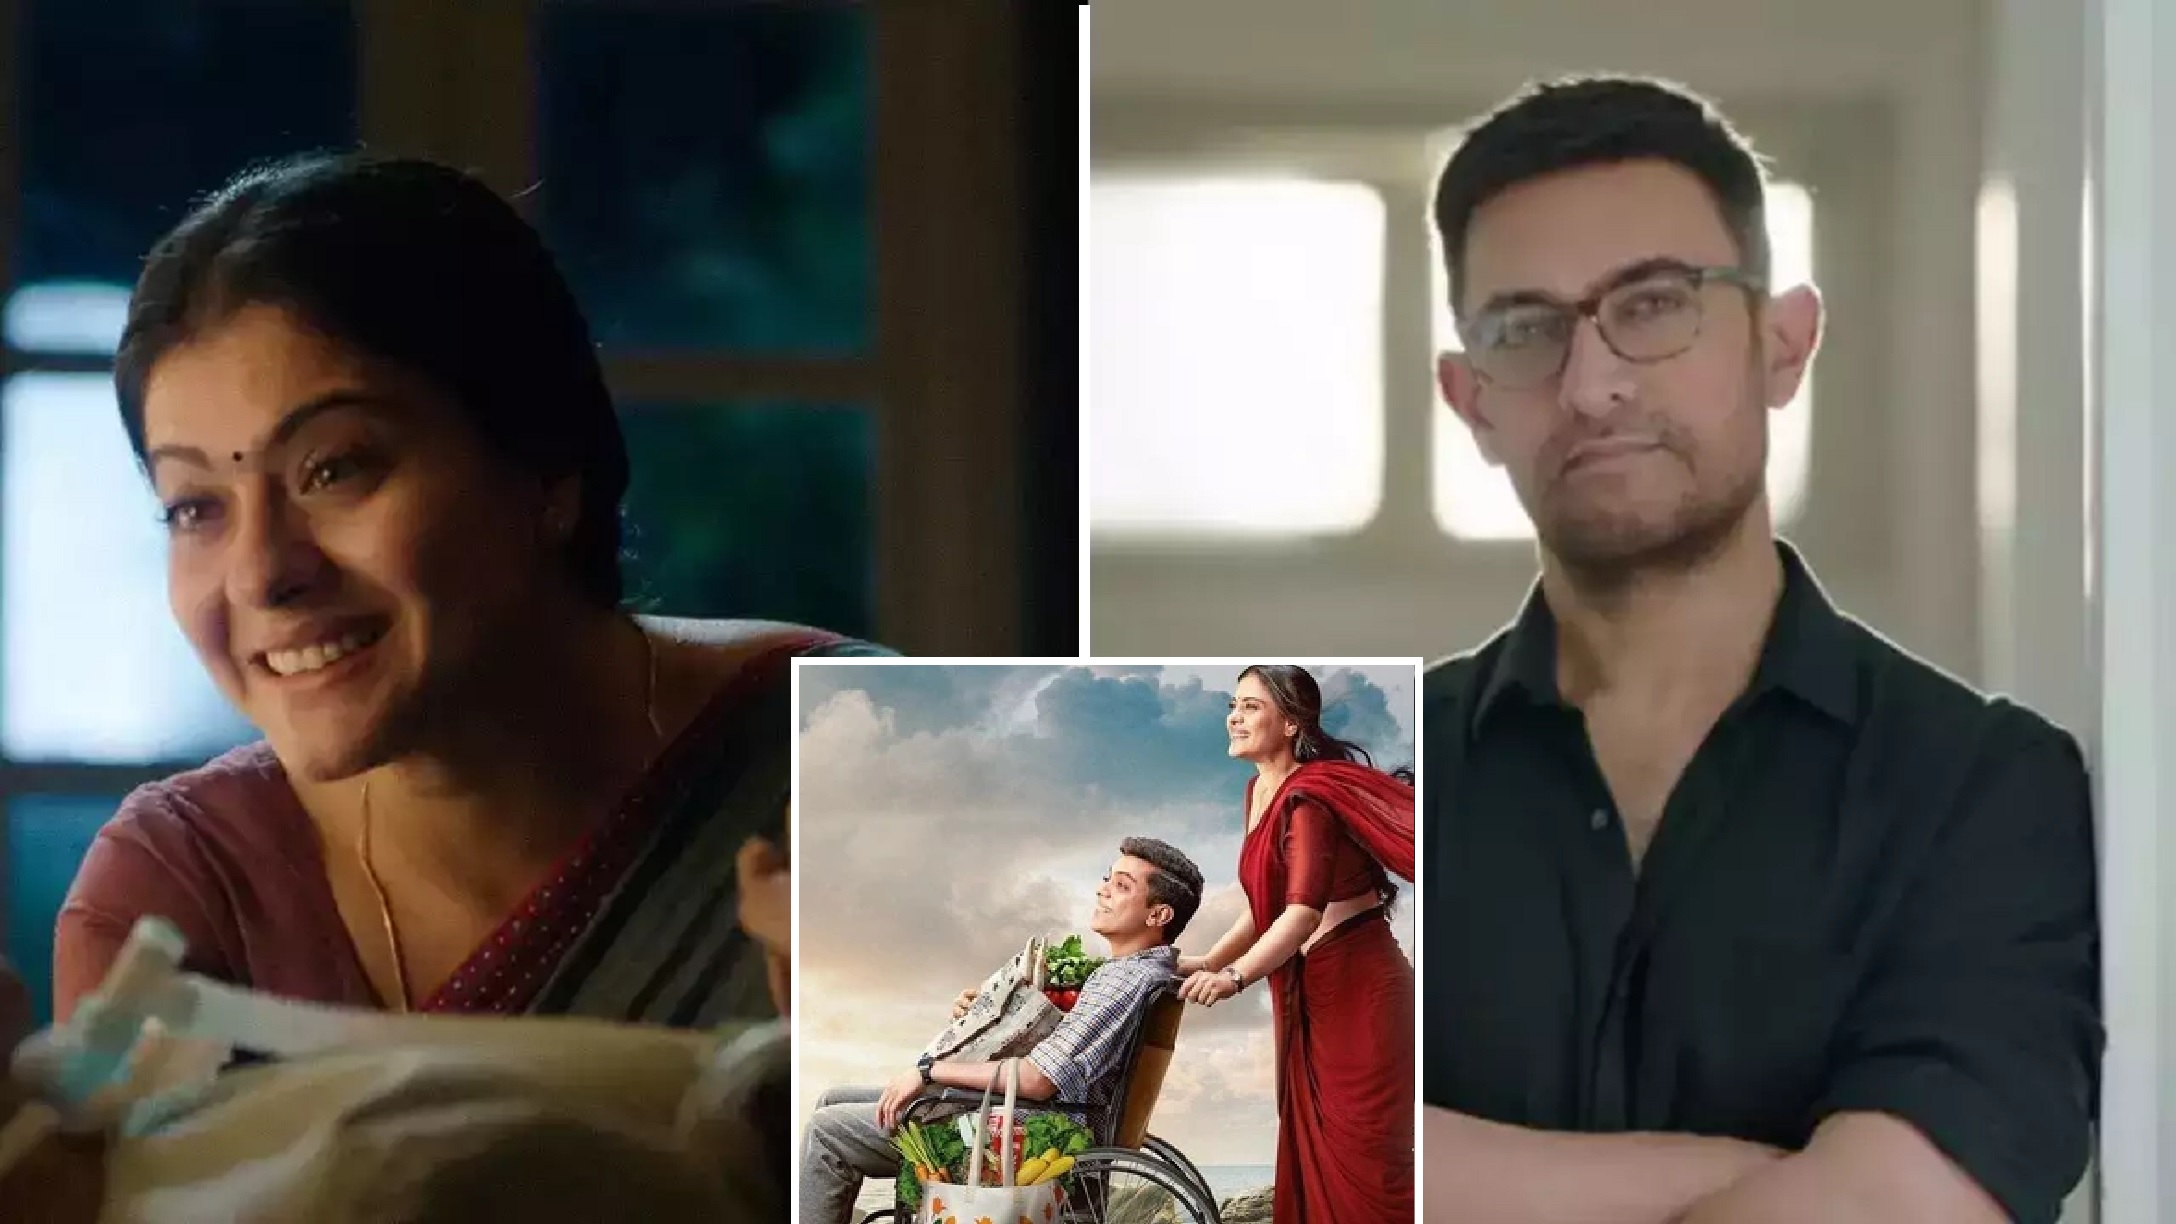 Kajol Turns Caring Mother For Ailing Son In Emotional New Trailer For ‘Salaam Venky’, Aamir Khan Cameo Surprises Internet